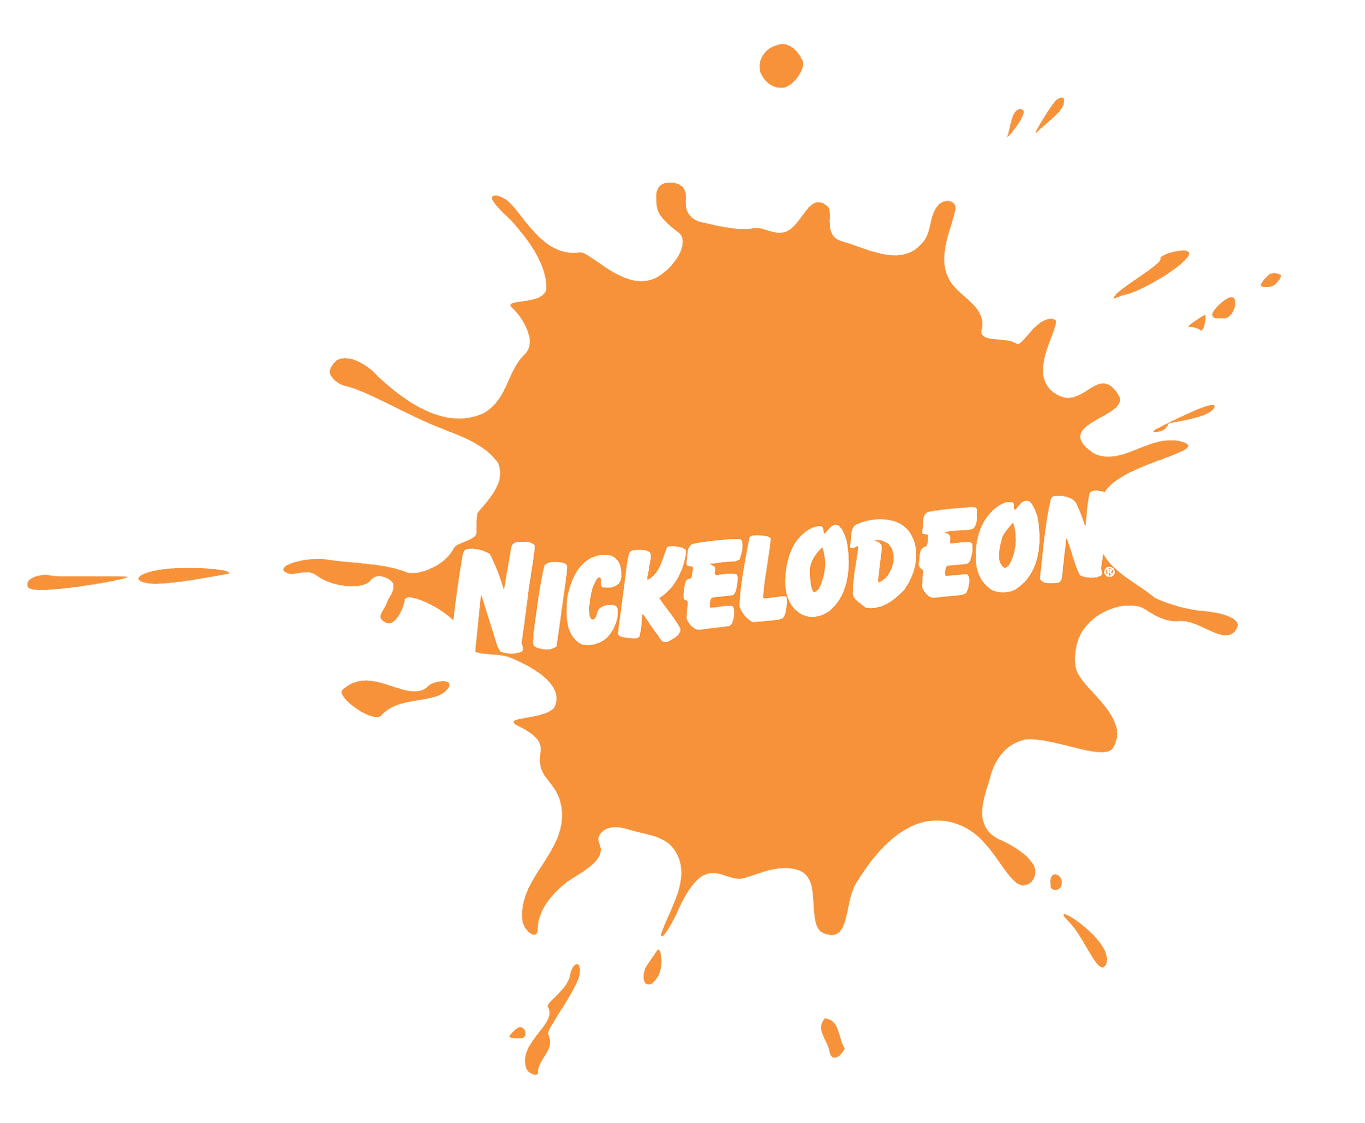 Nickelodeon Down, Netflix Up - Viacom Doesn't See Connection